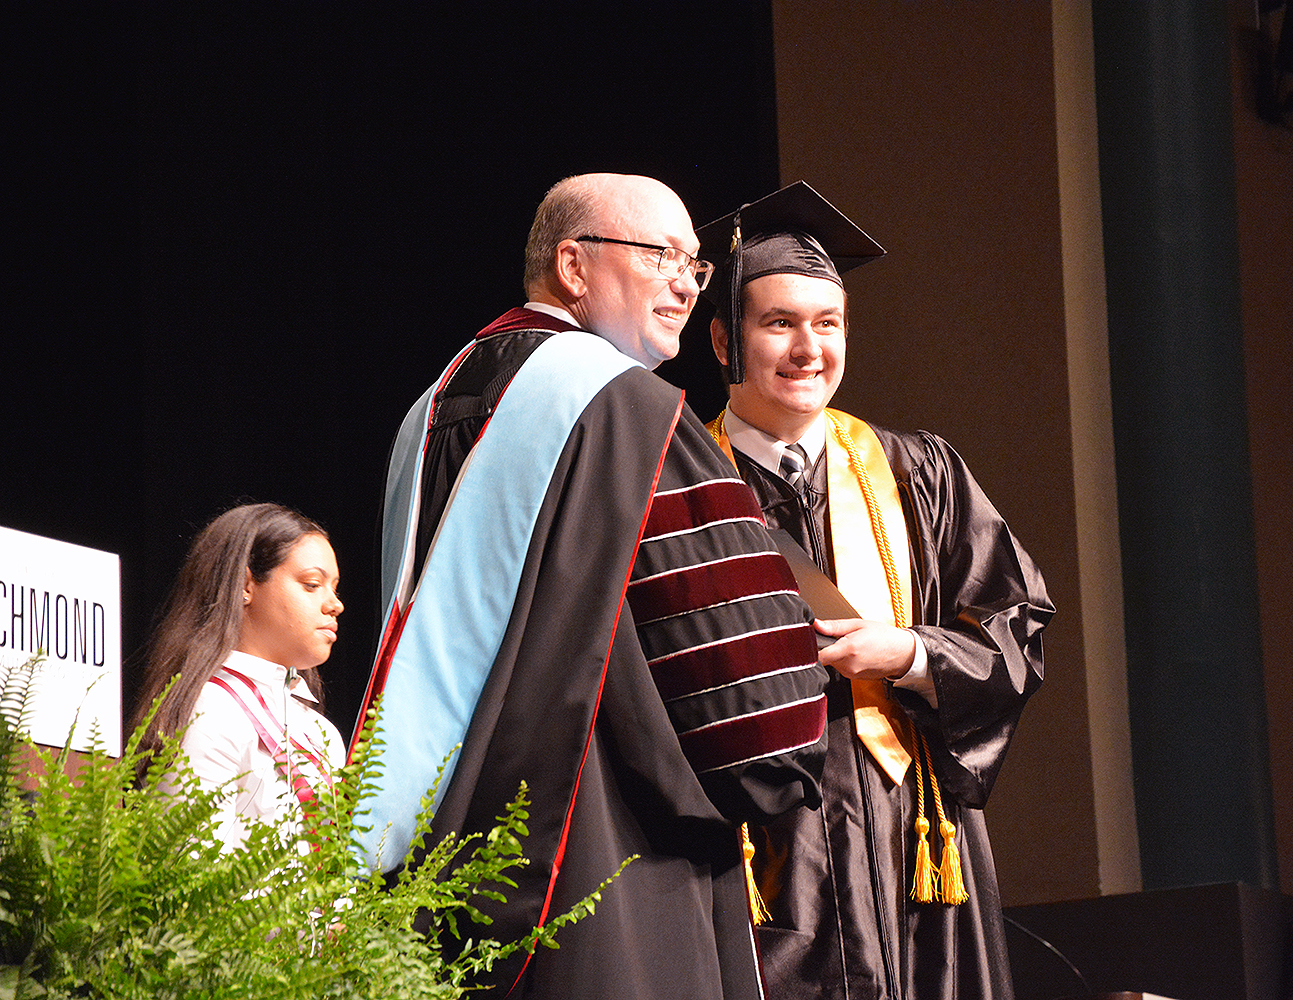 Graduate receives diploma from College President during graduation